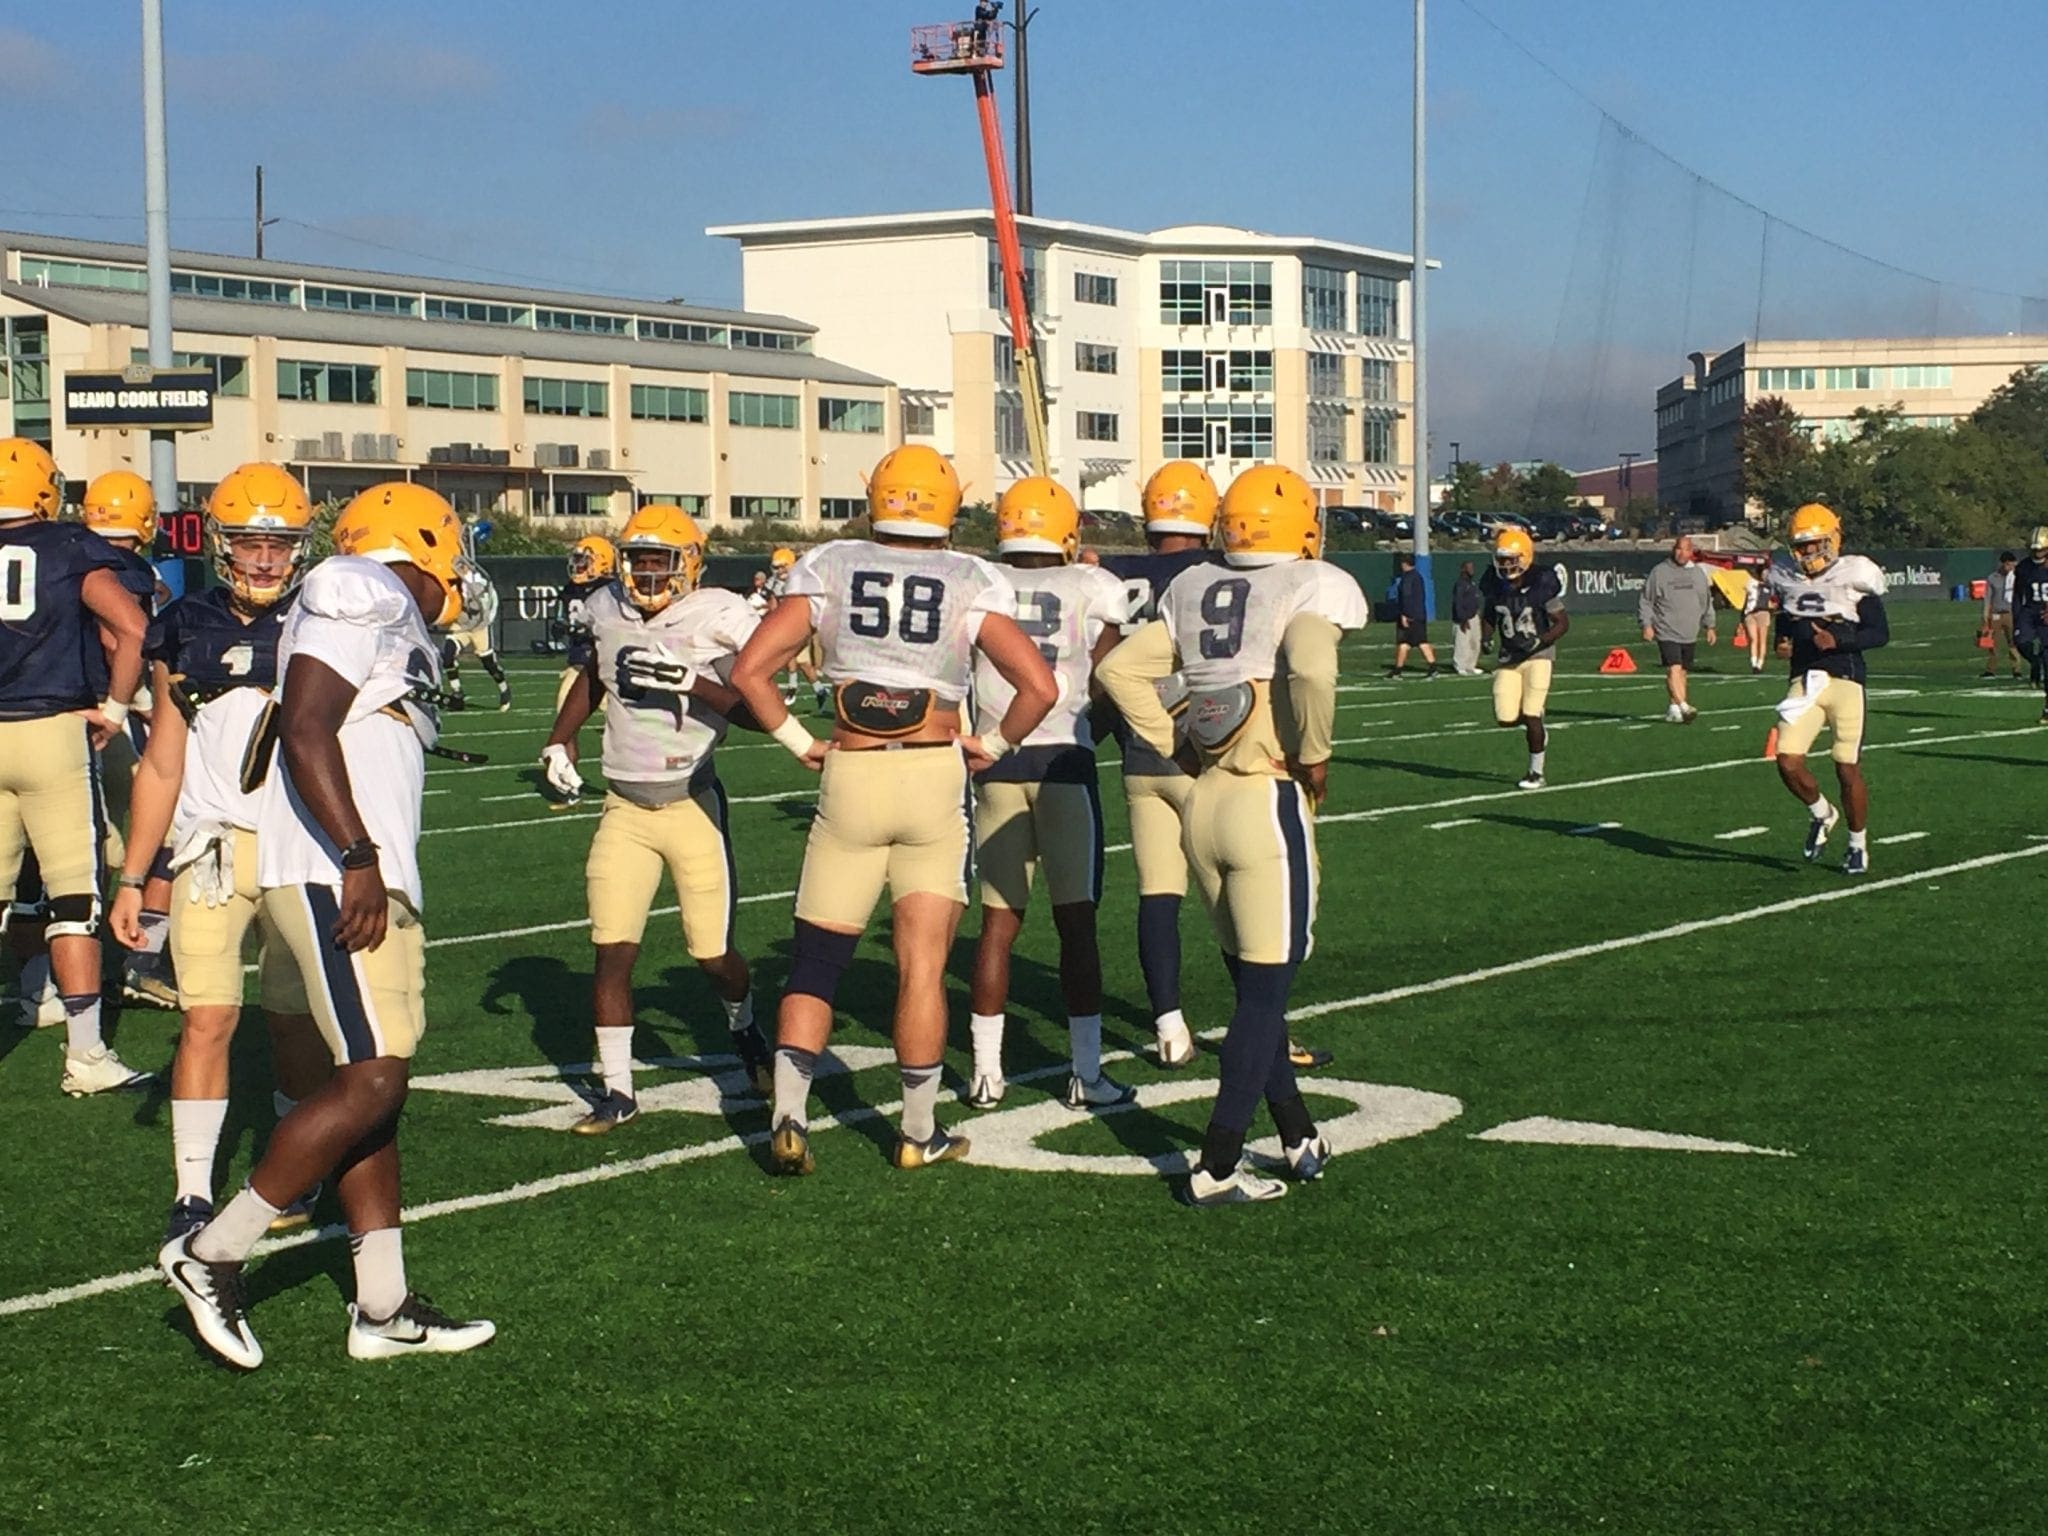 Pitt practices in their throwback helmets (Photo credit: Alan Saunders)